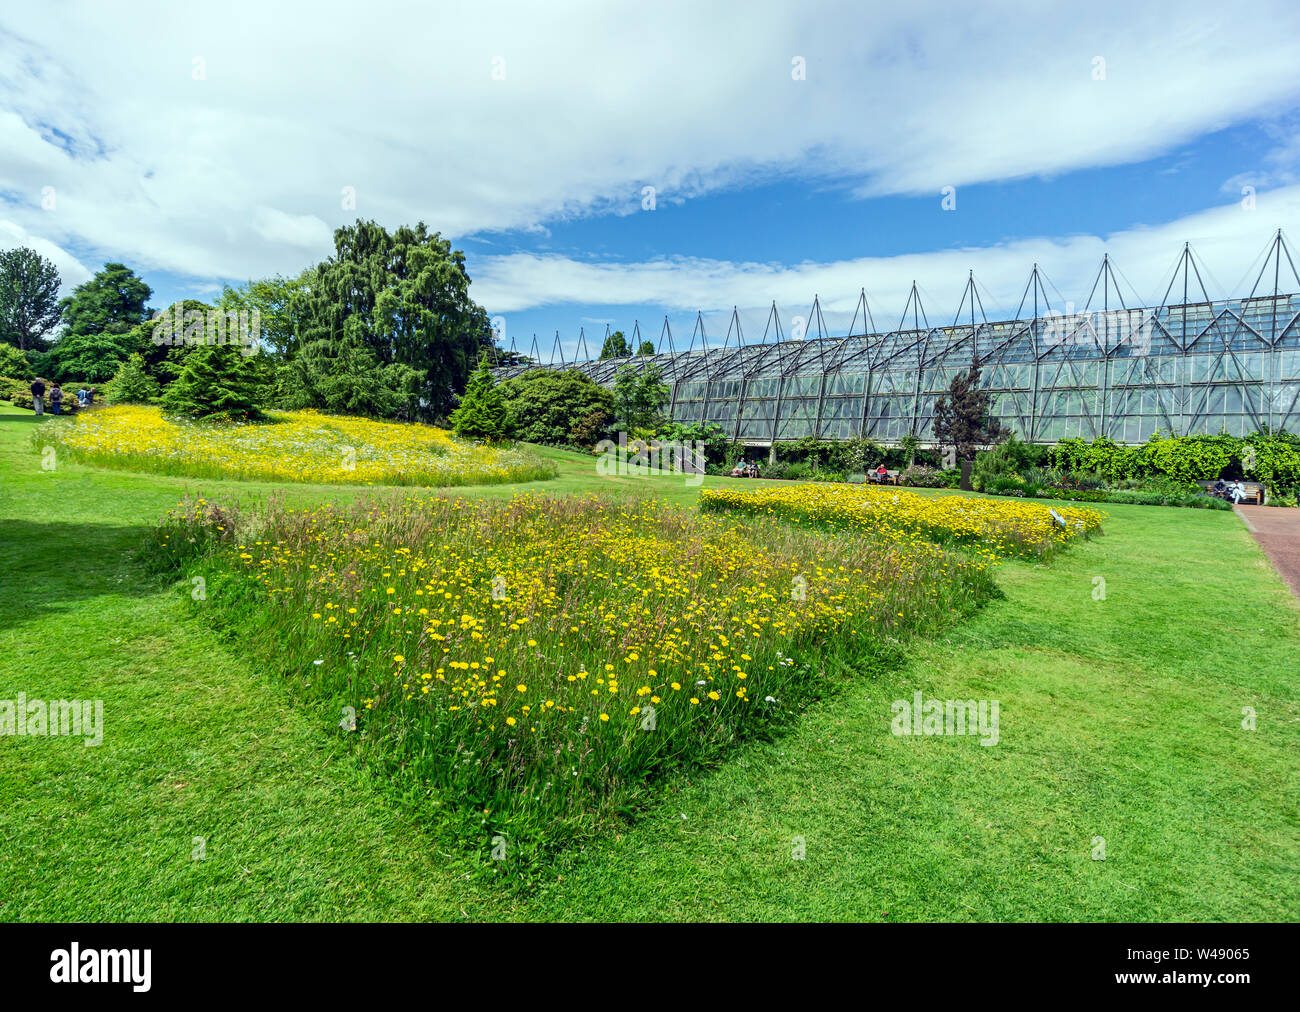 Low growing wild flowers in the lawn in front of the glass houses in the Royal Botanic Garden Edinburgh Scotland UK to create living lawns Stock Photo